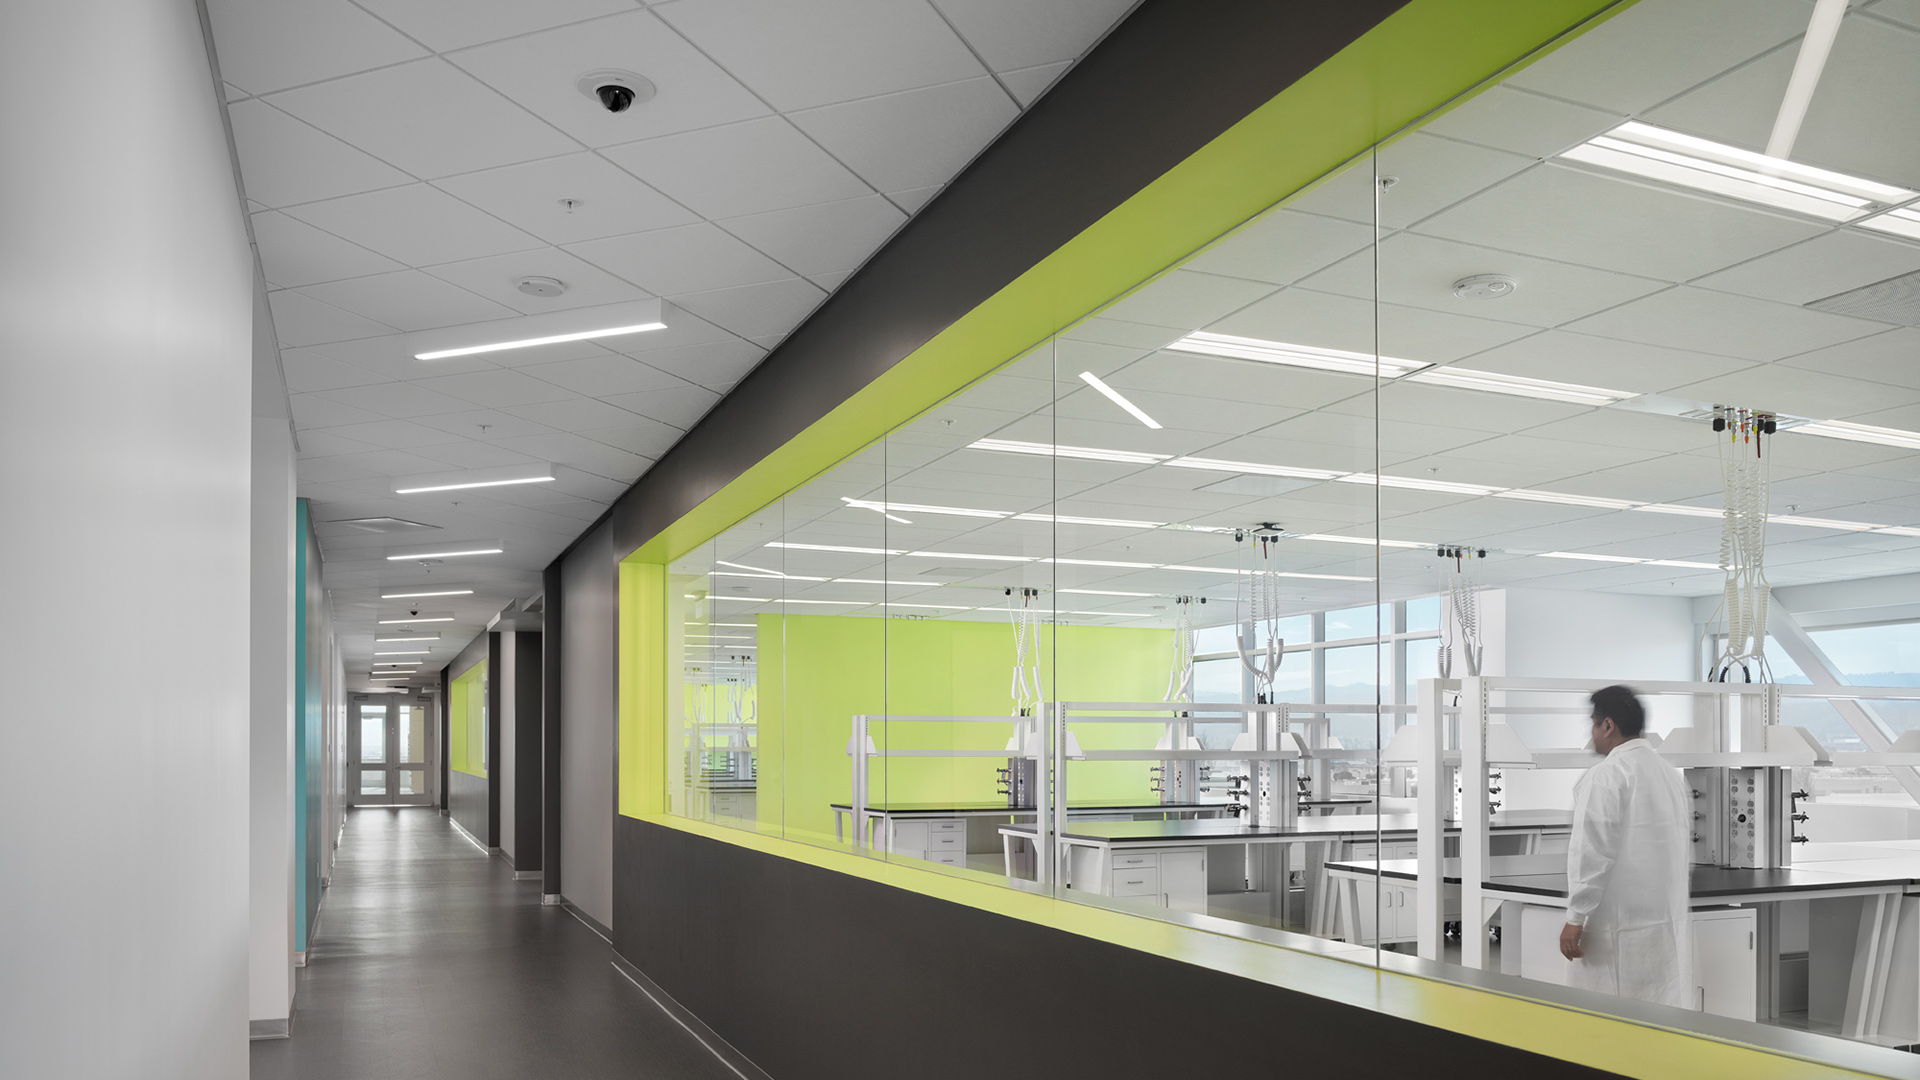 Interior at a confidential life science facility, circulation with science on display view into lab spaces